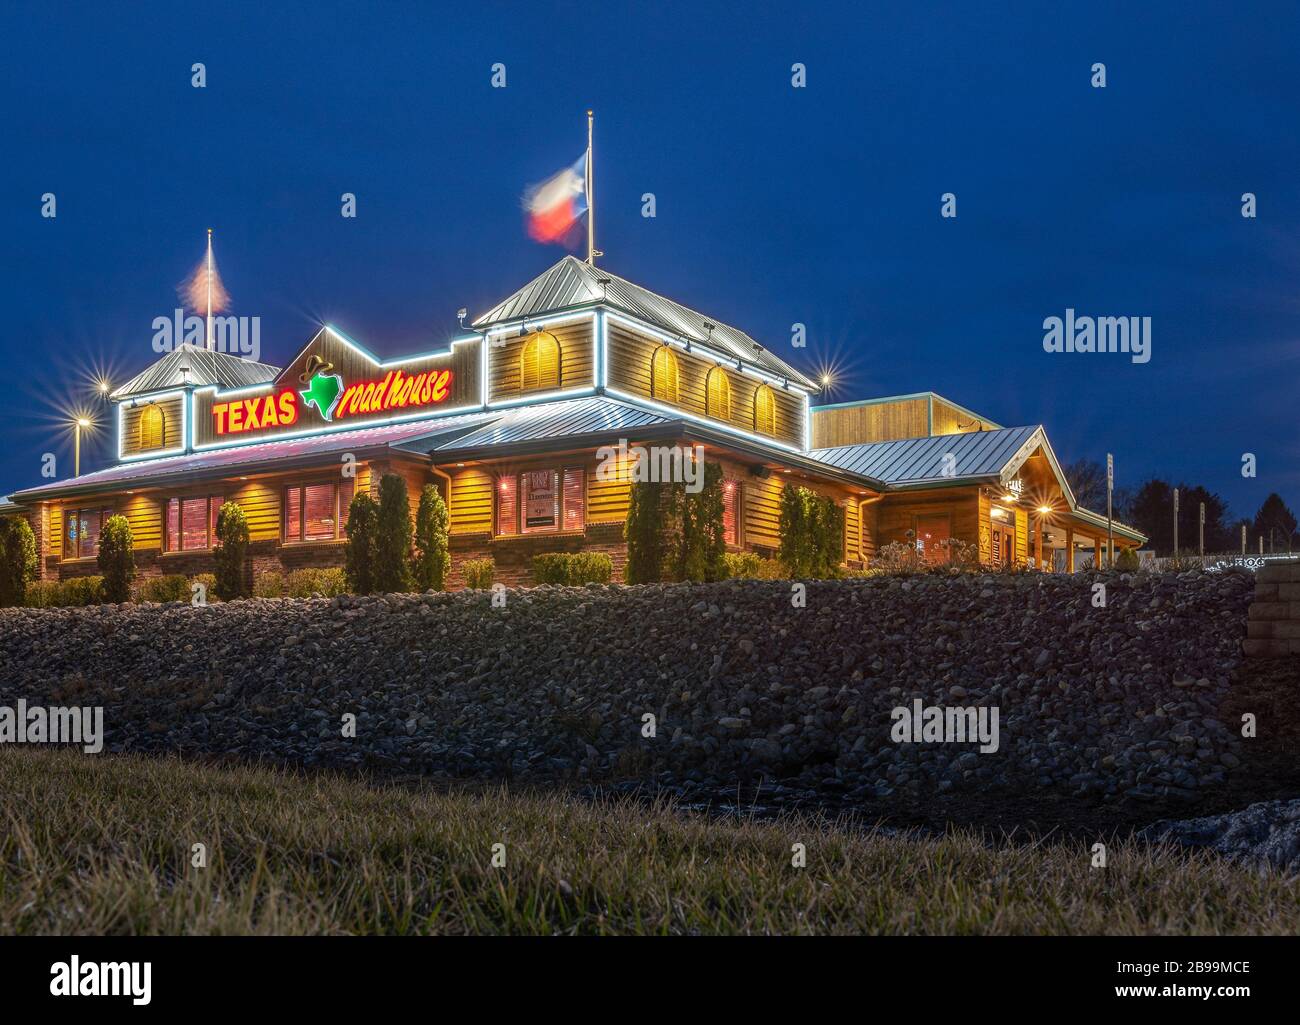 New Hartford, New York - Mar 19, 2020: Night View of Texas Roadhouse Restaurant Location, Texas Roadhouse is a Chain Restaurant Offering Western Theme Stock Photo